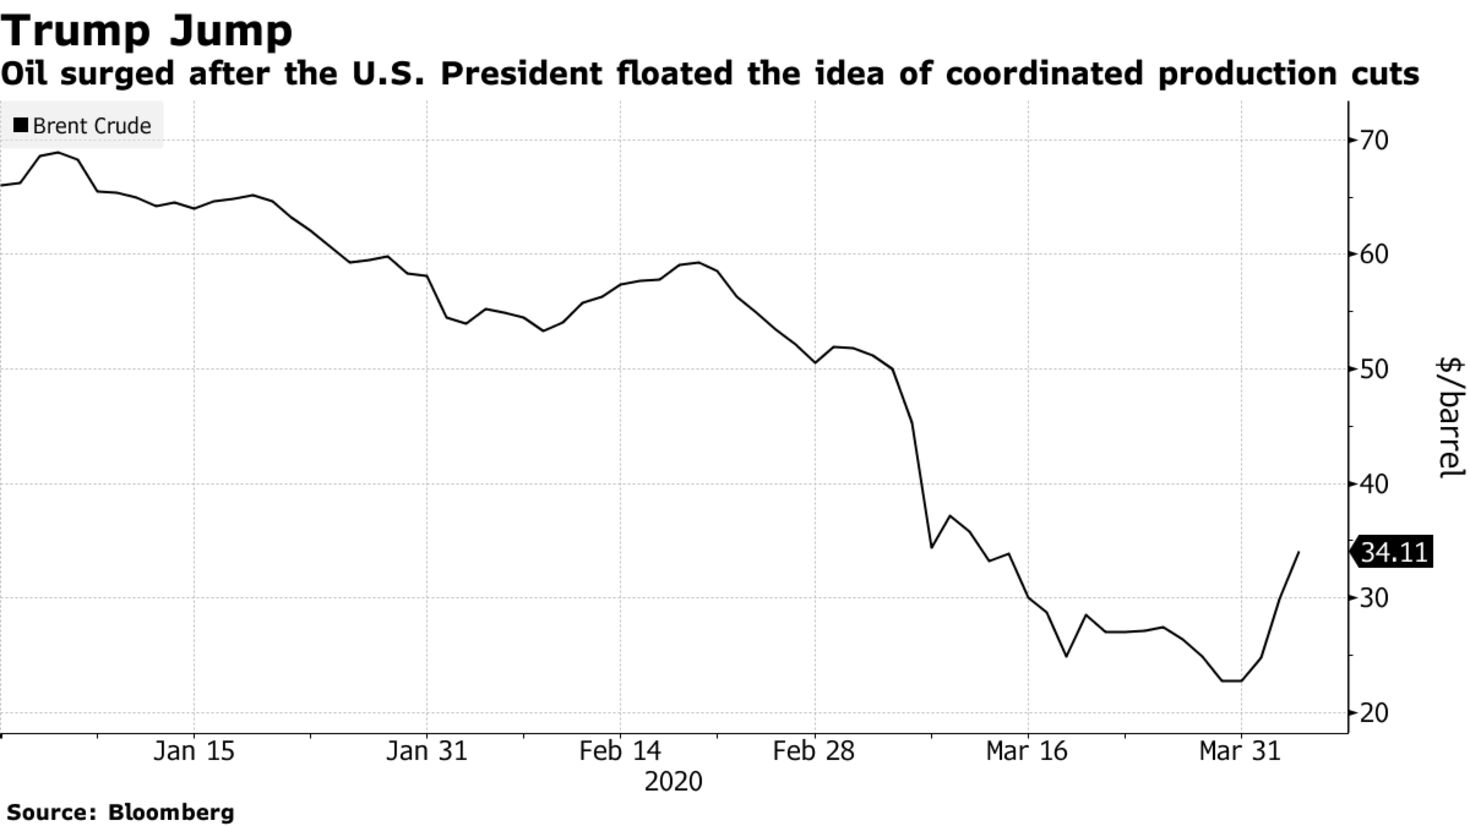 Oil surged after the U.S. President floated the idea of coordinated production cuts